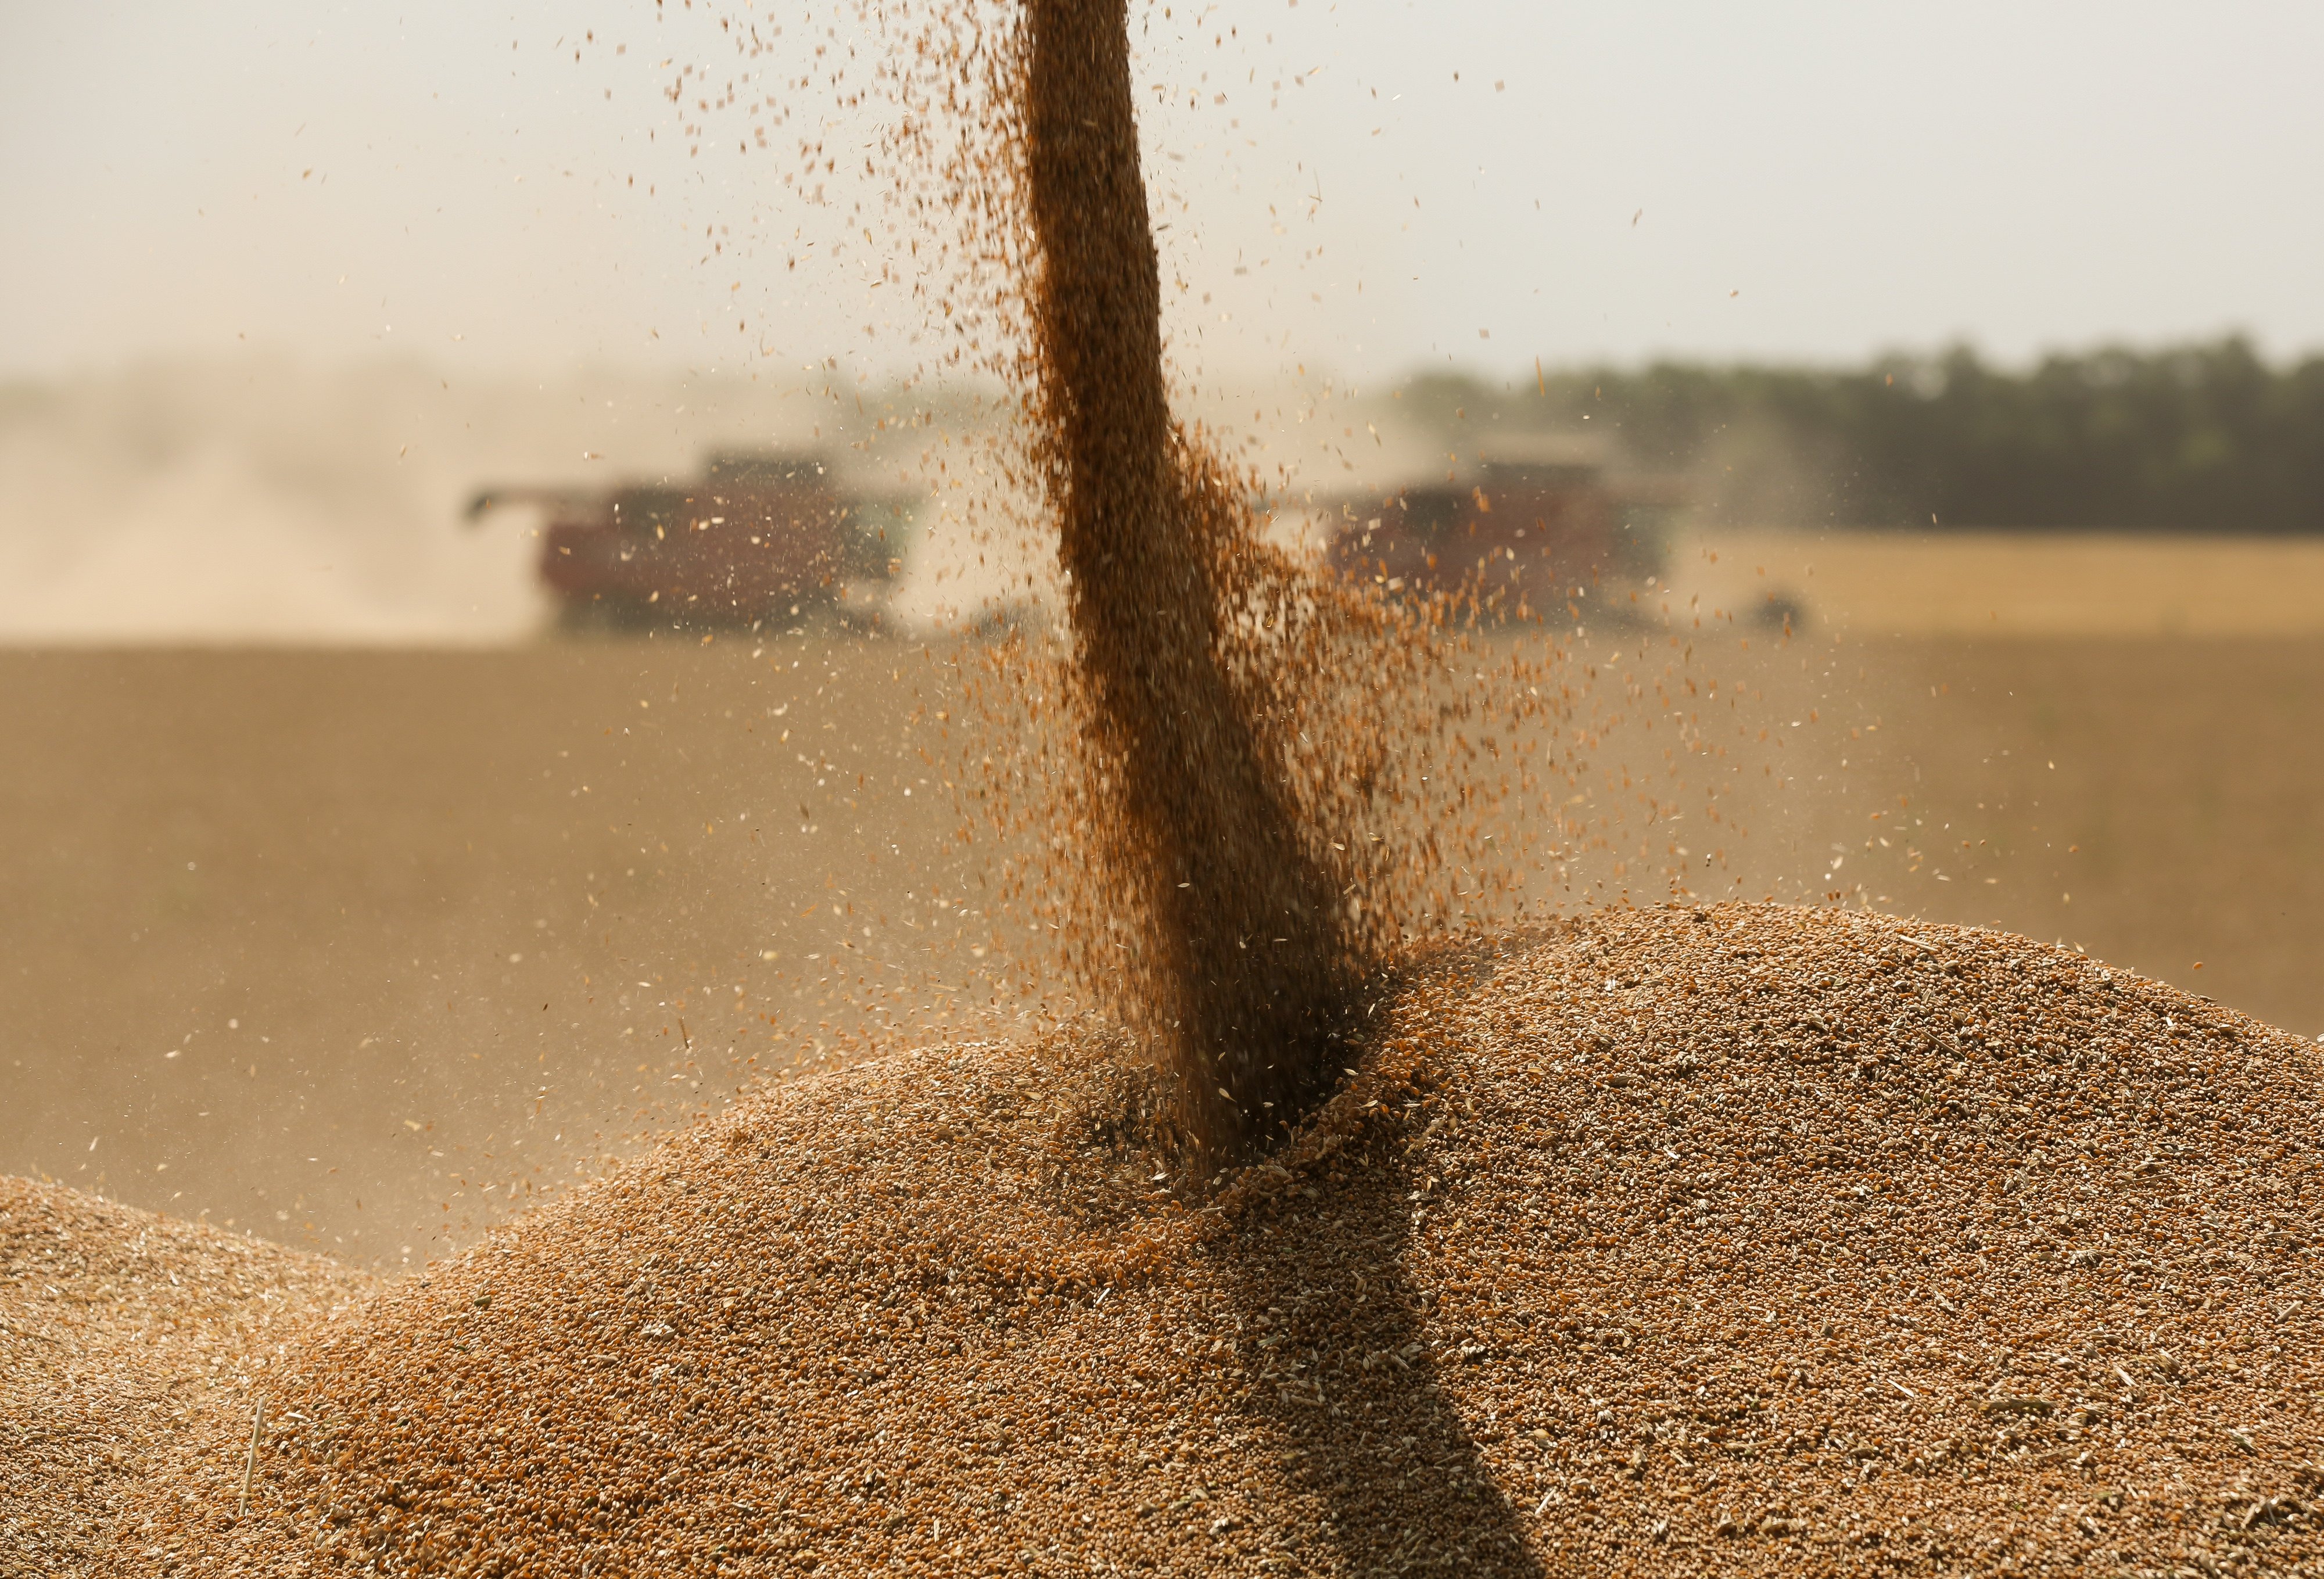 Russia will deliver 70 million tonnes of grain, legumes and oilseeds to China over the next 12 years, under the terms of a new deal. Photo: Bloomberg